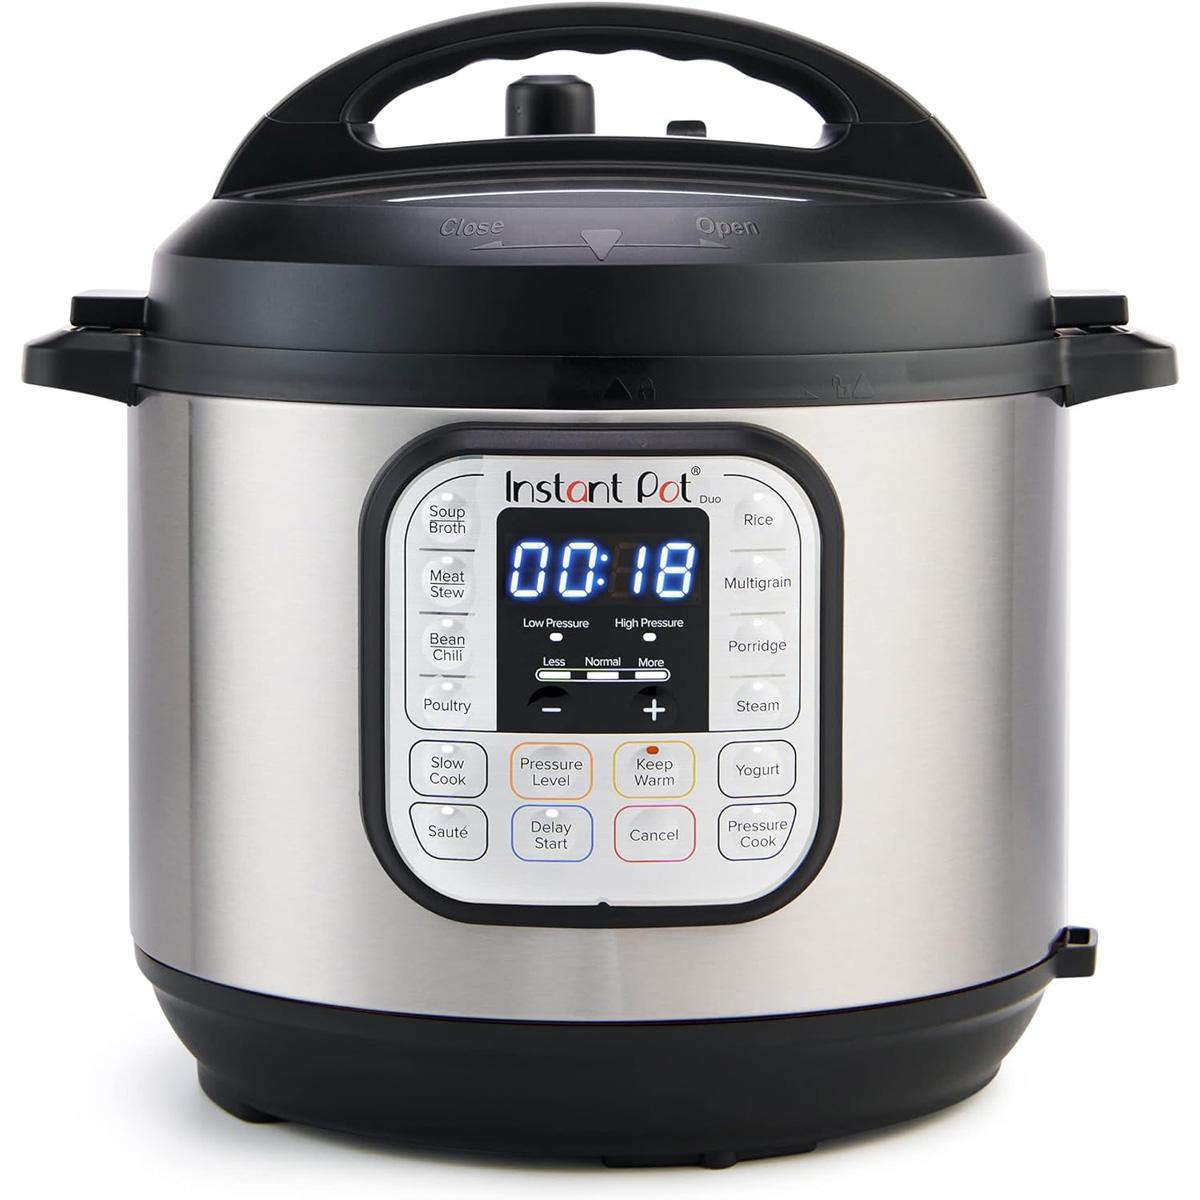 Instant Pot Duo 7-in-1 Electric Pressure Cooker for $49.99 Shipped